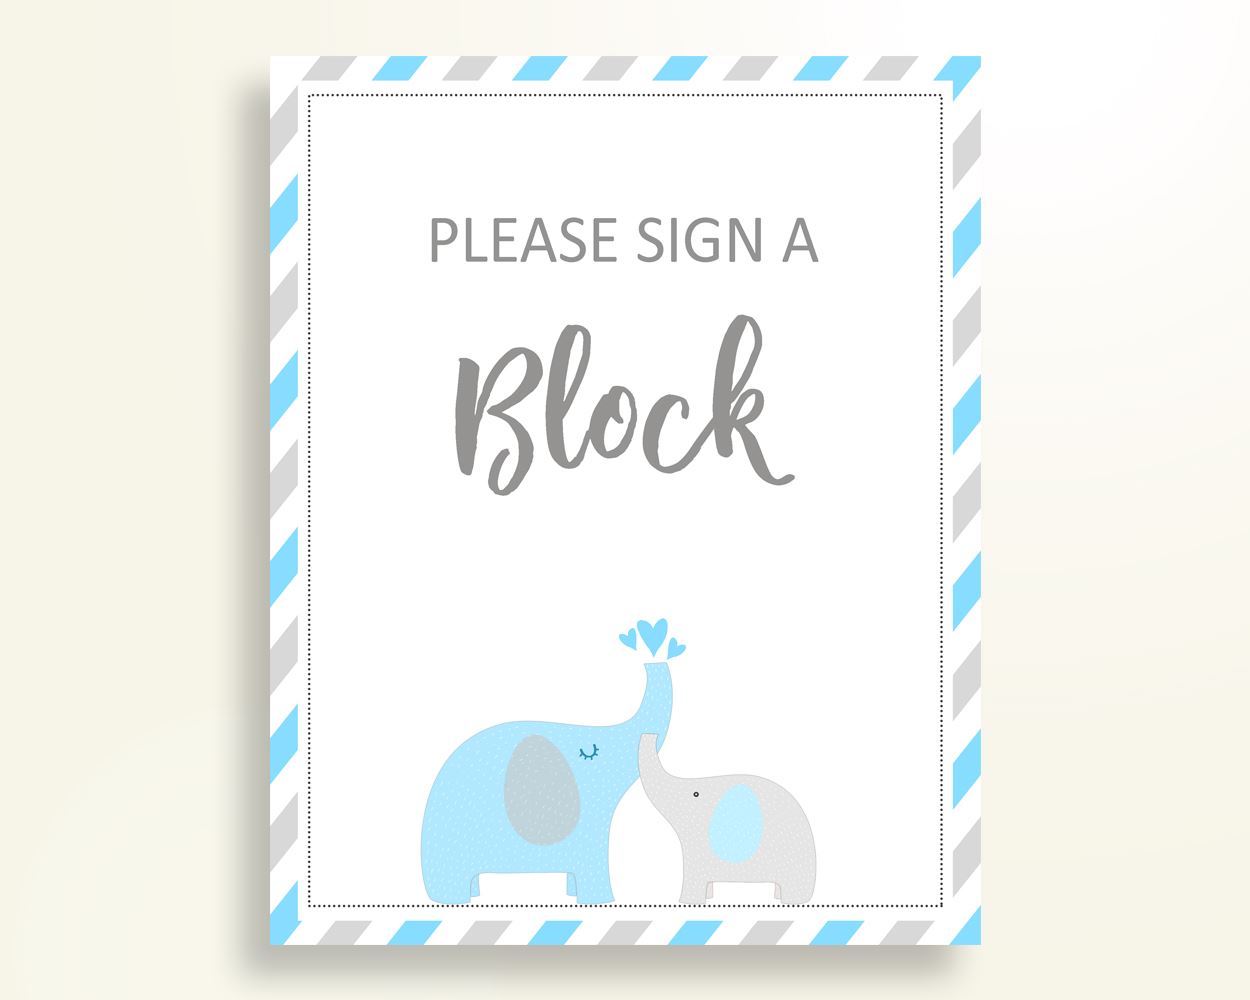 Sign A Block Baby Shower Decorate A Block Elephant Baby Shower Sign A Block Blue Gray Baby Shower Elephant Decorate A Block prints C0U64 - Digital Product